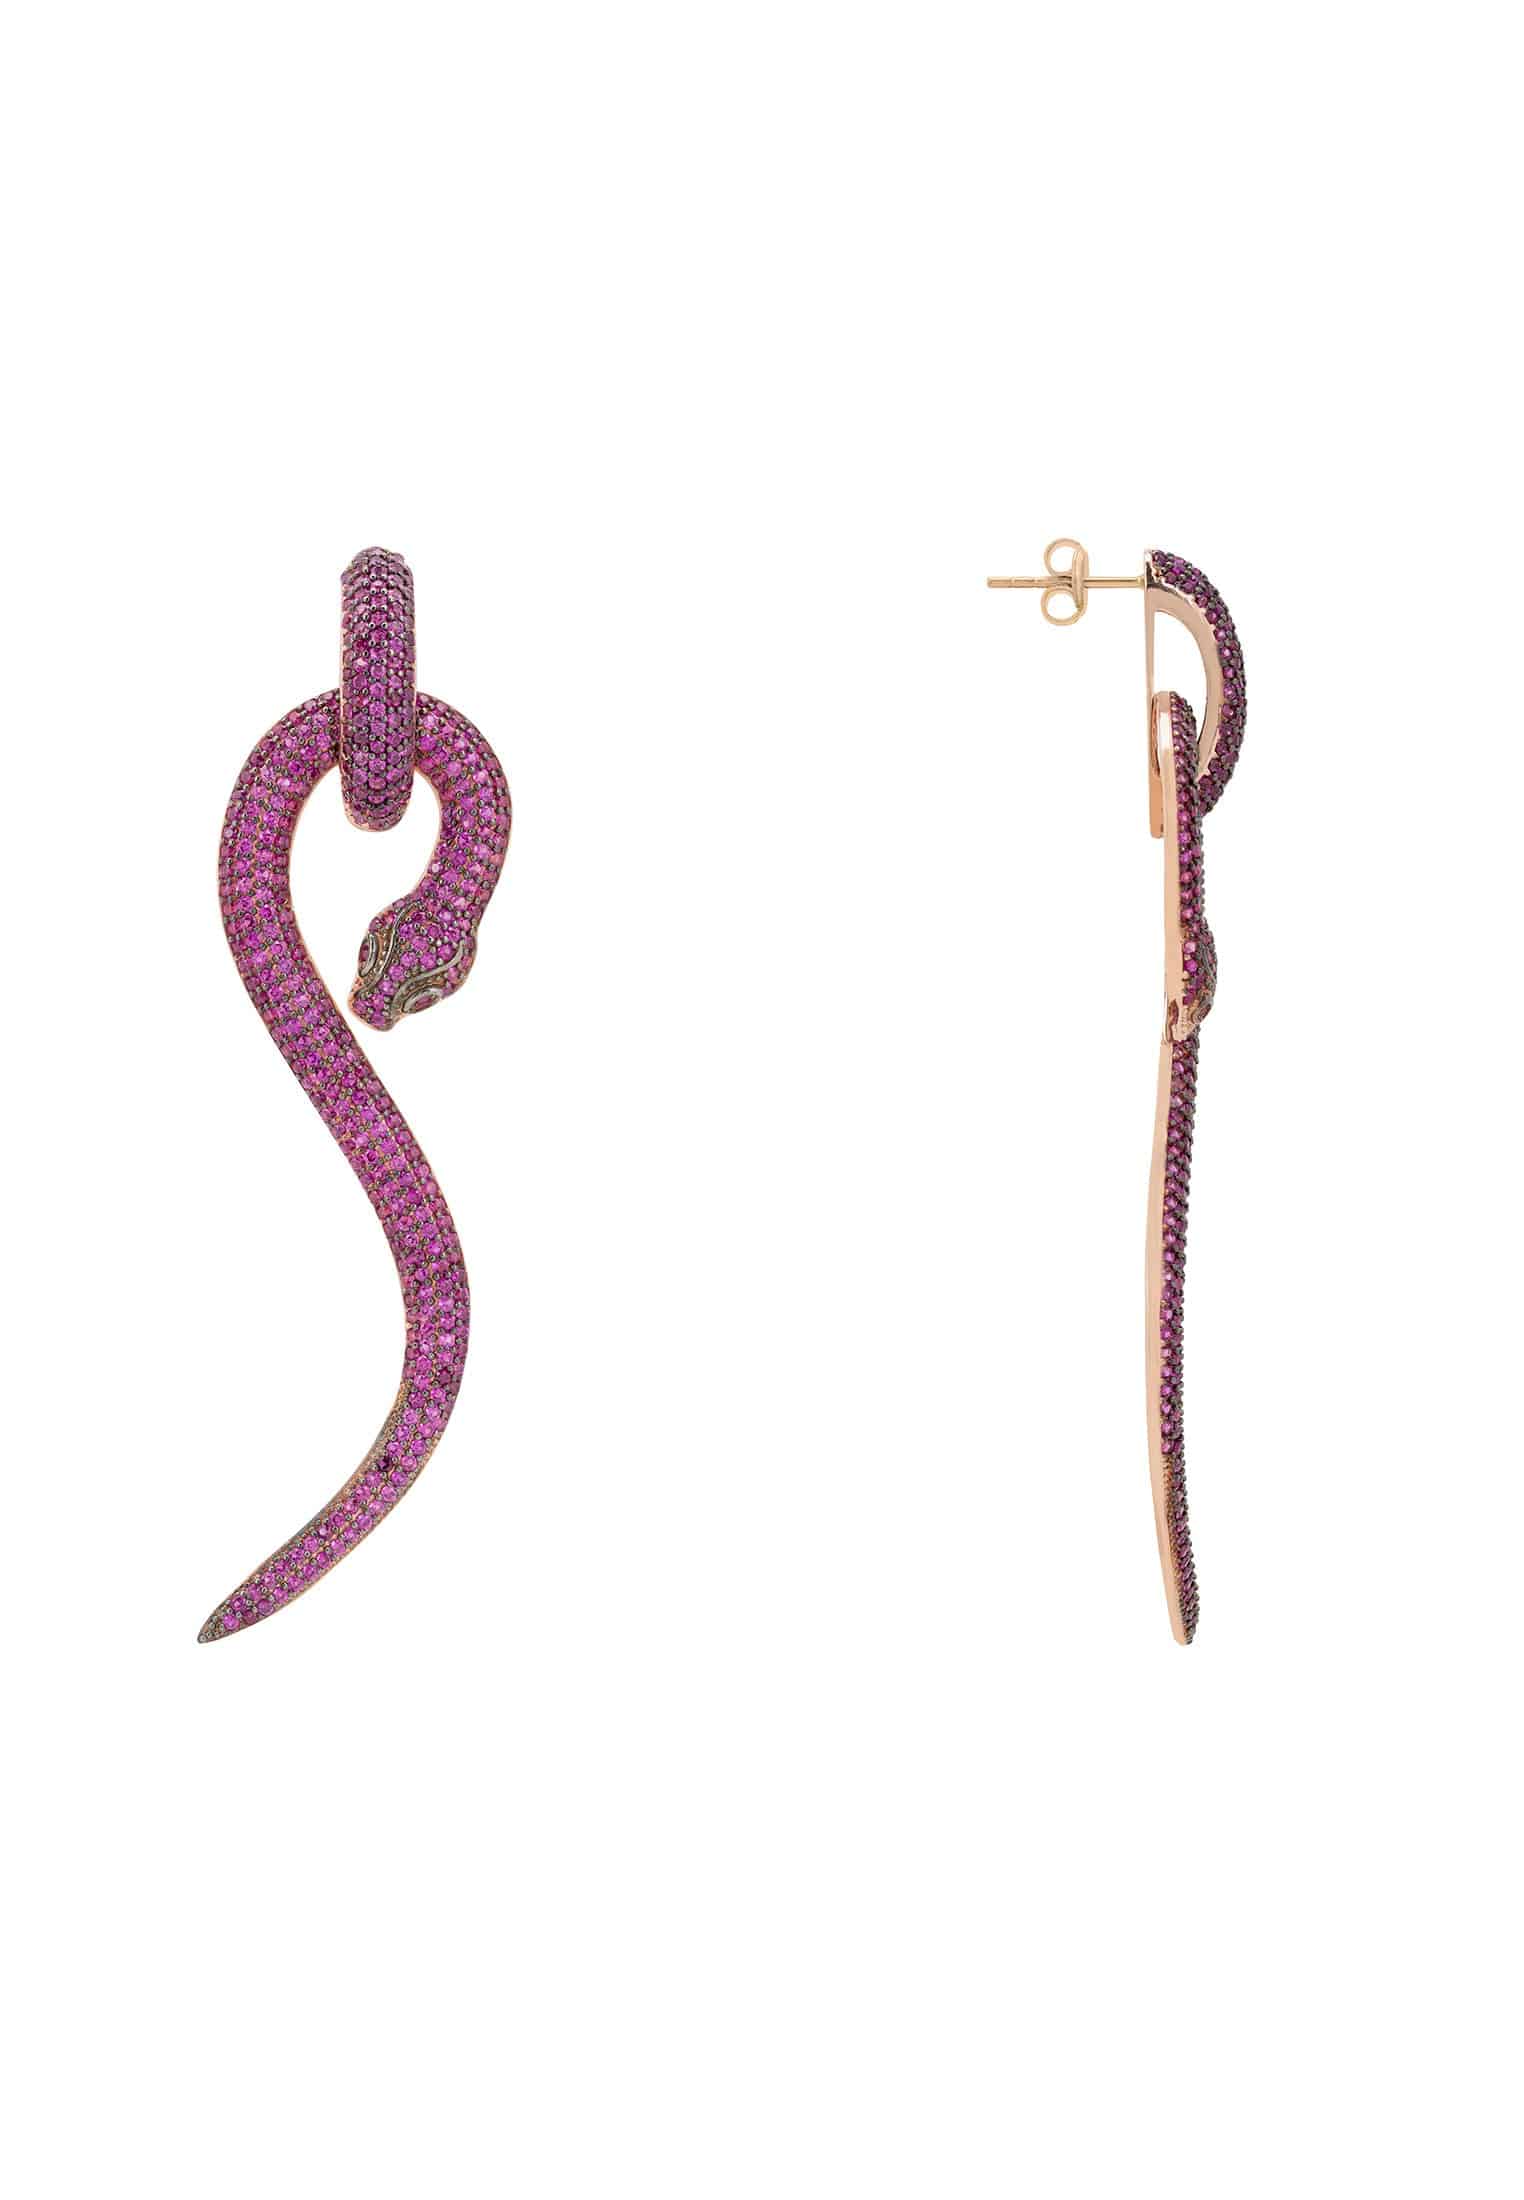 Rosegold Anaconda Snake Drop Earrings with Ruby CZ Stones - Animal Inspired Jewelry for Day to Night - Jewelry & Watches - Bijou Her -  -  - 